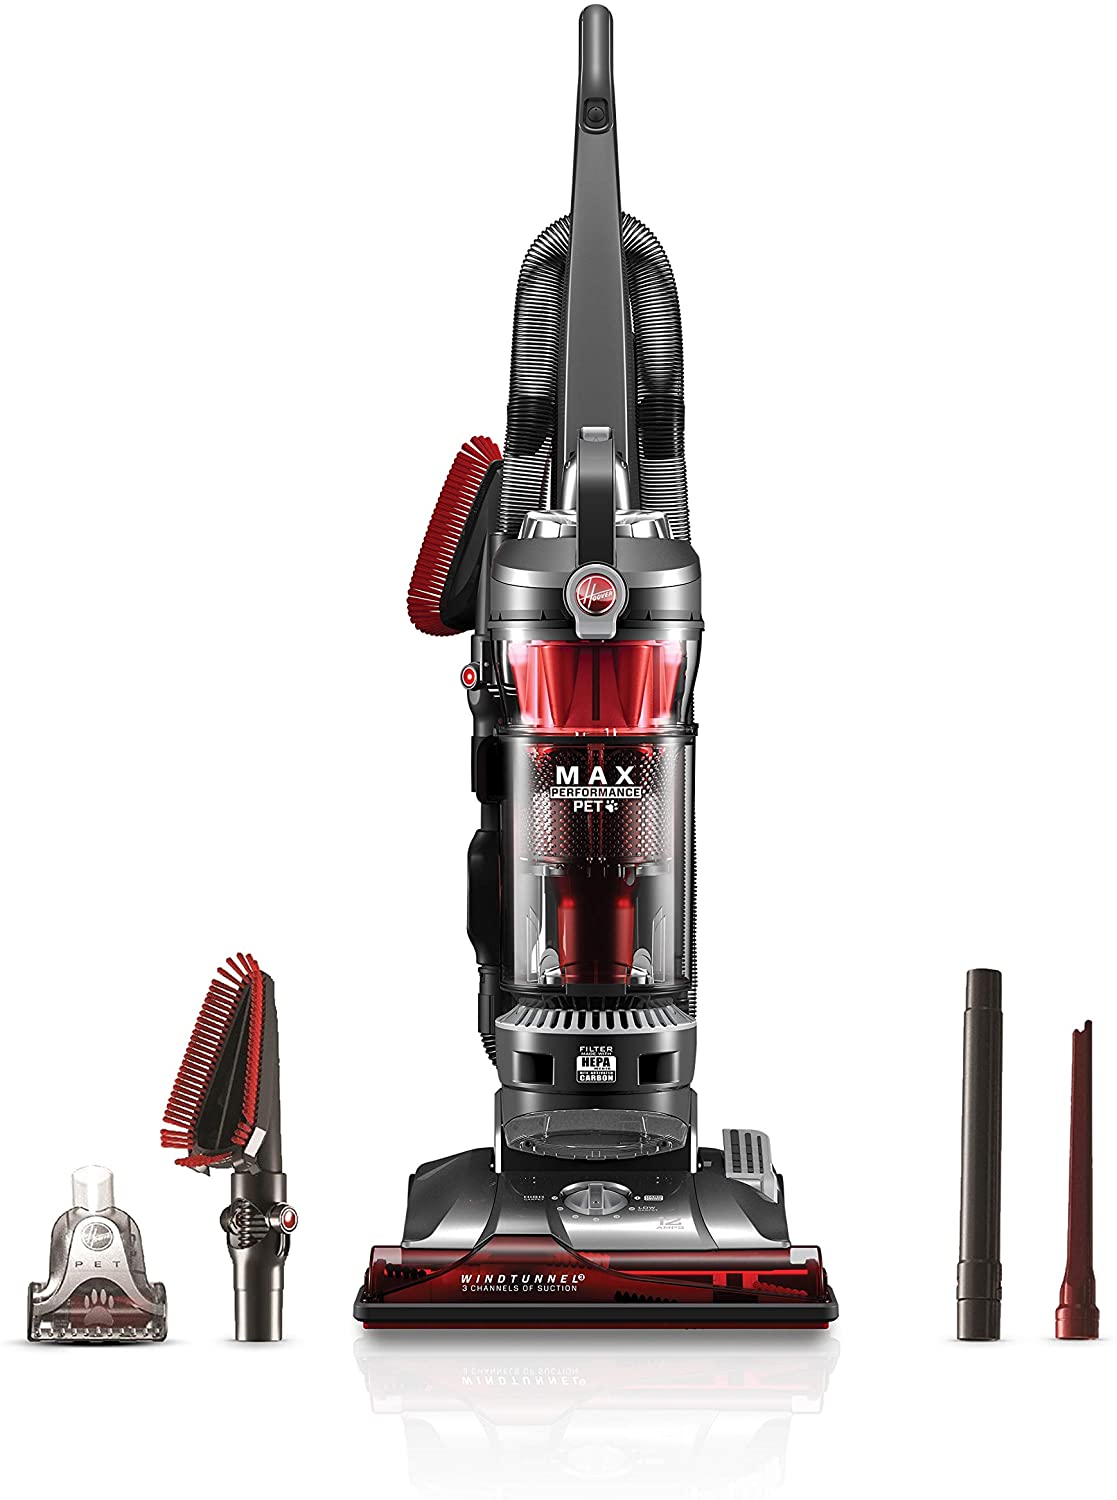 Hoover WindTunnel 3 Max Performance Upright Vacuum Cleaner, HEPA Media Filtration and Powerful Suction for Pet Hair, UH72625, Red - image 1 of 11